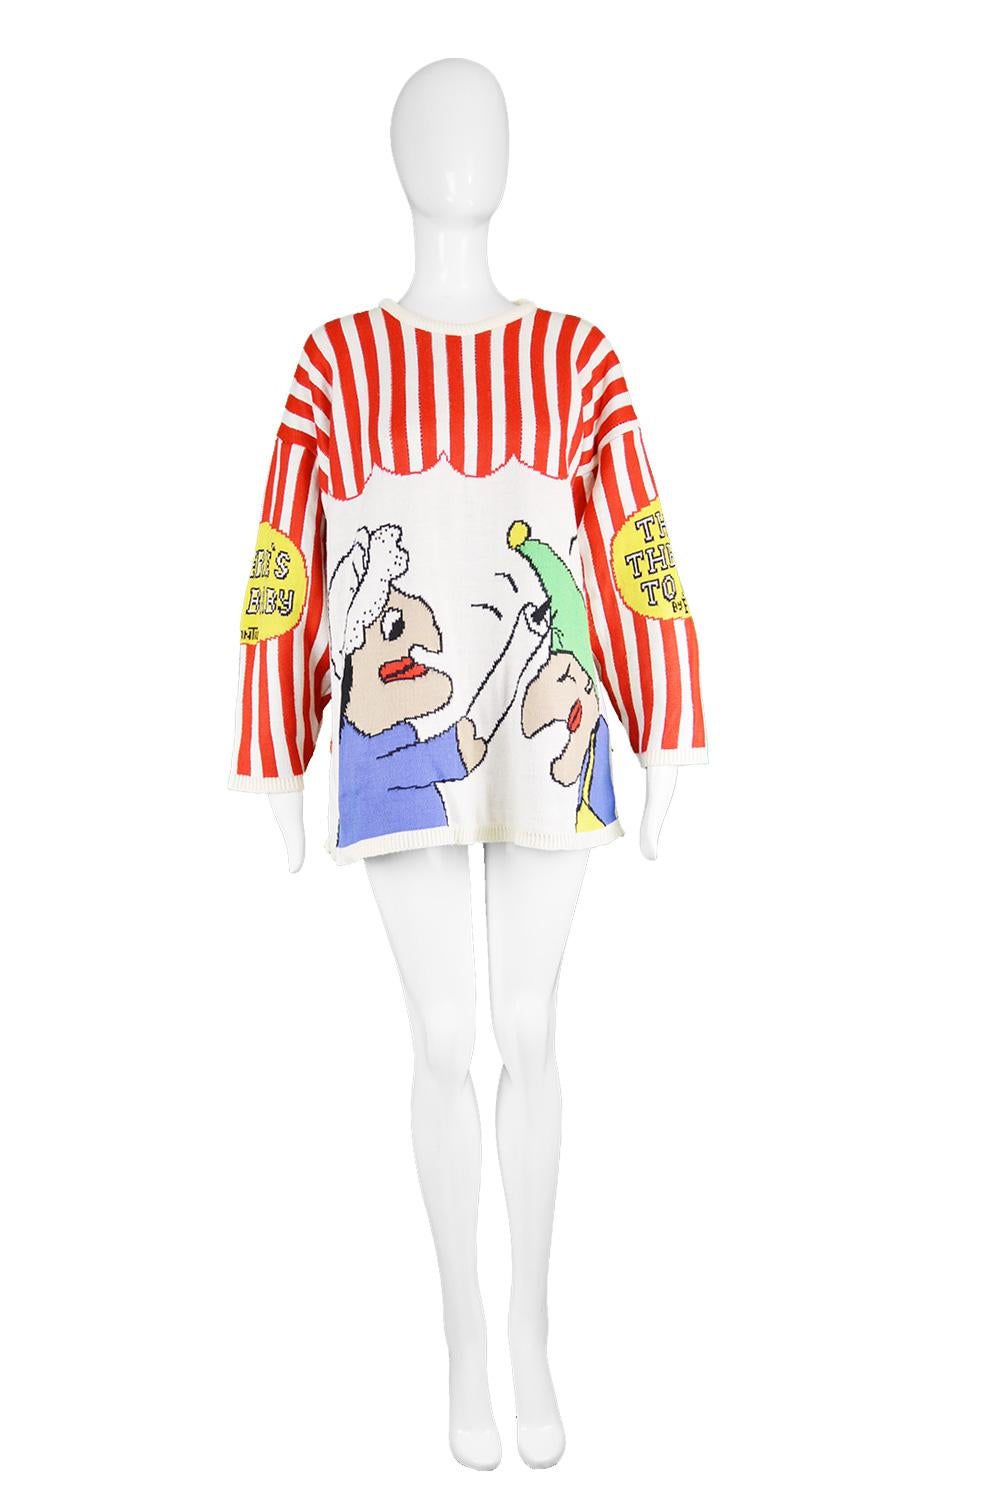 An ultra cool vintage women's oversized crew neck sweater from the 90s by British boutique label, Frantic. In a cream acrylic knit fabric with red stripes and a bold, tongue in cheek pop art take on the Punch & Judy puppet shows. It has the words